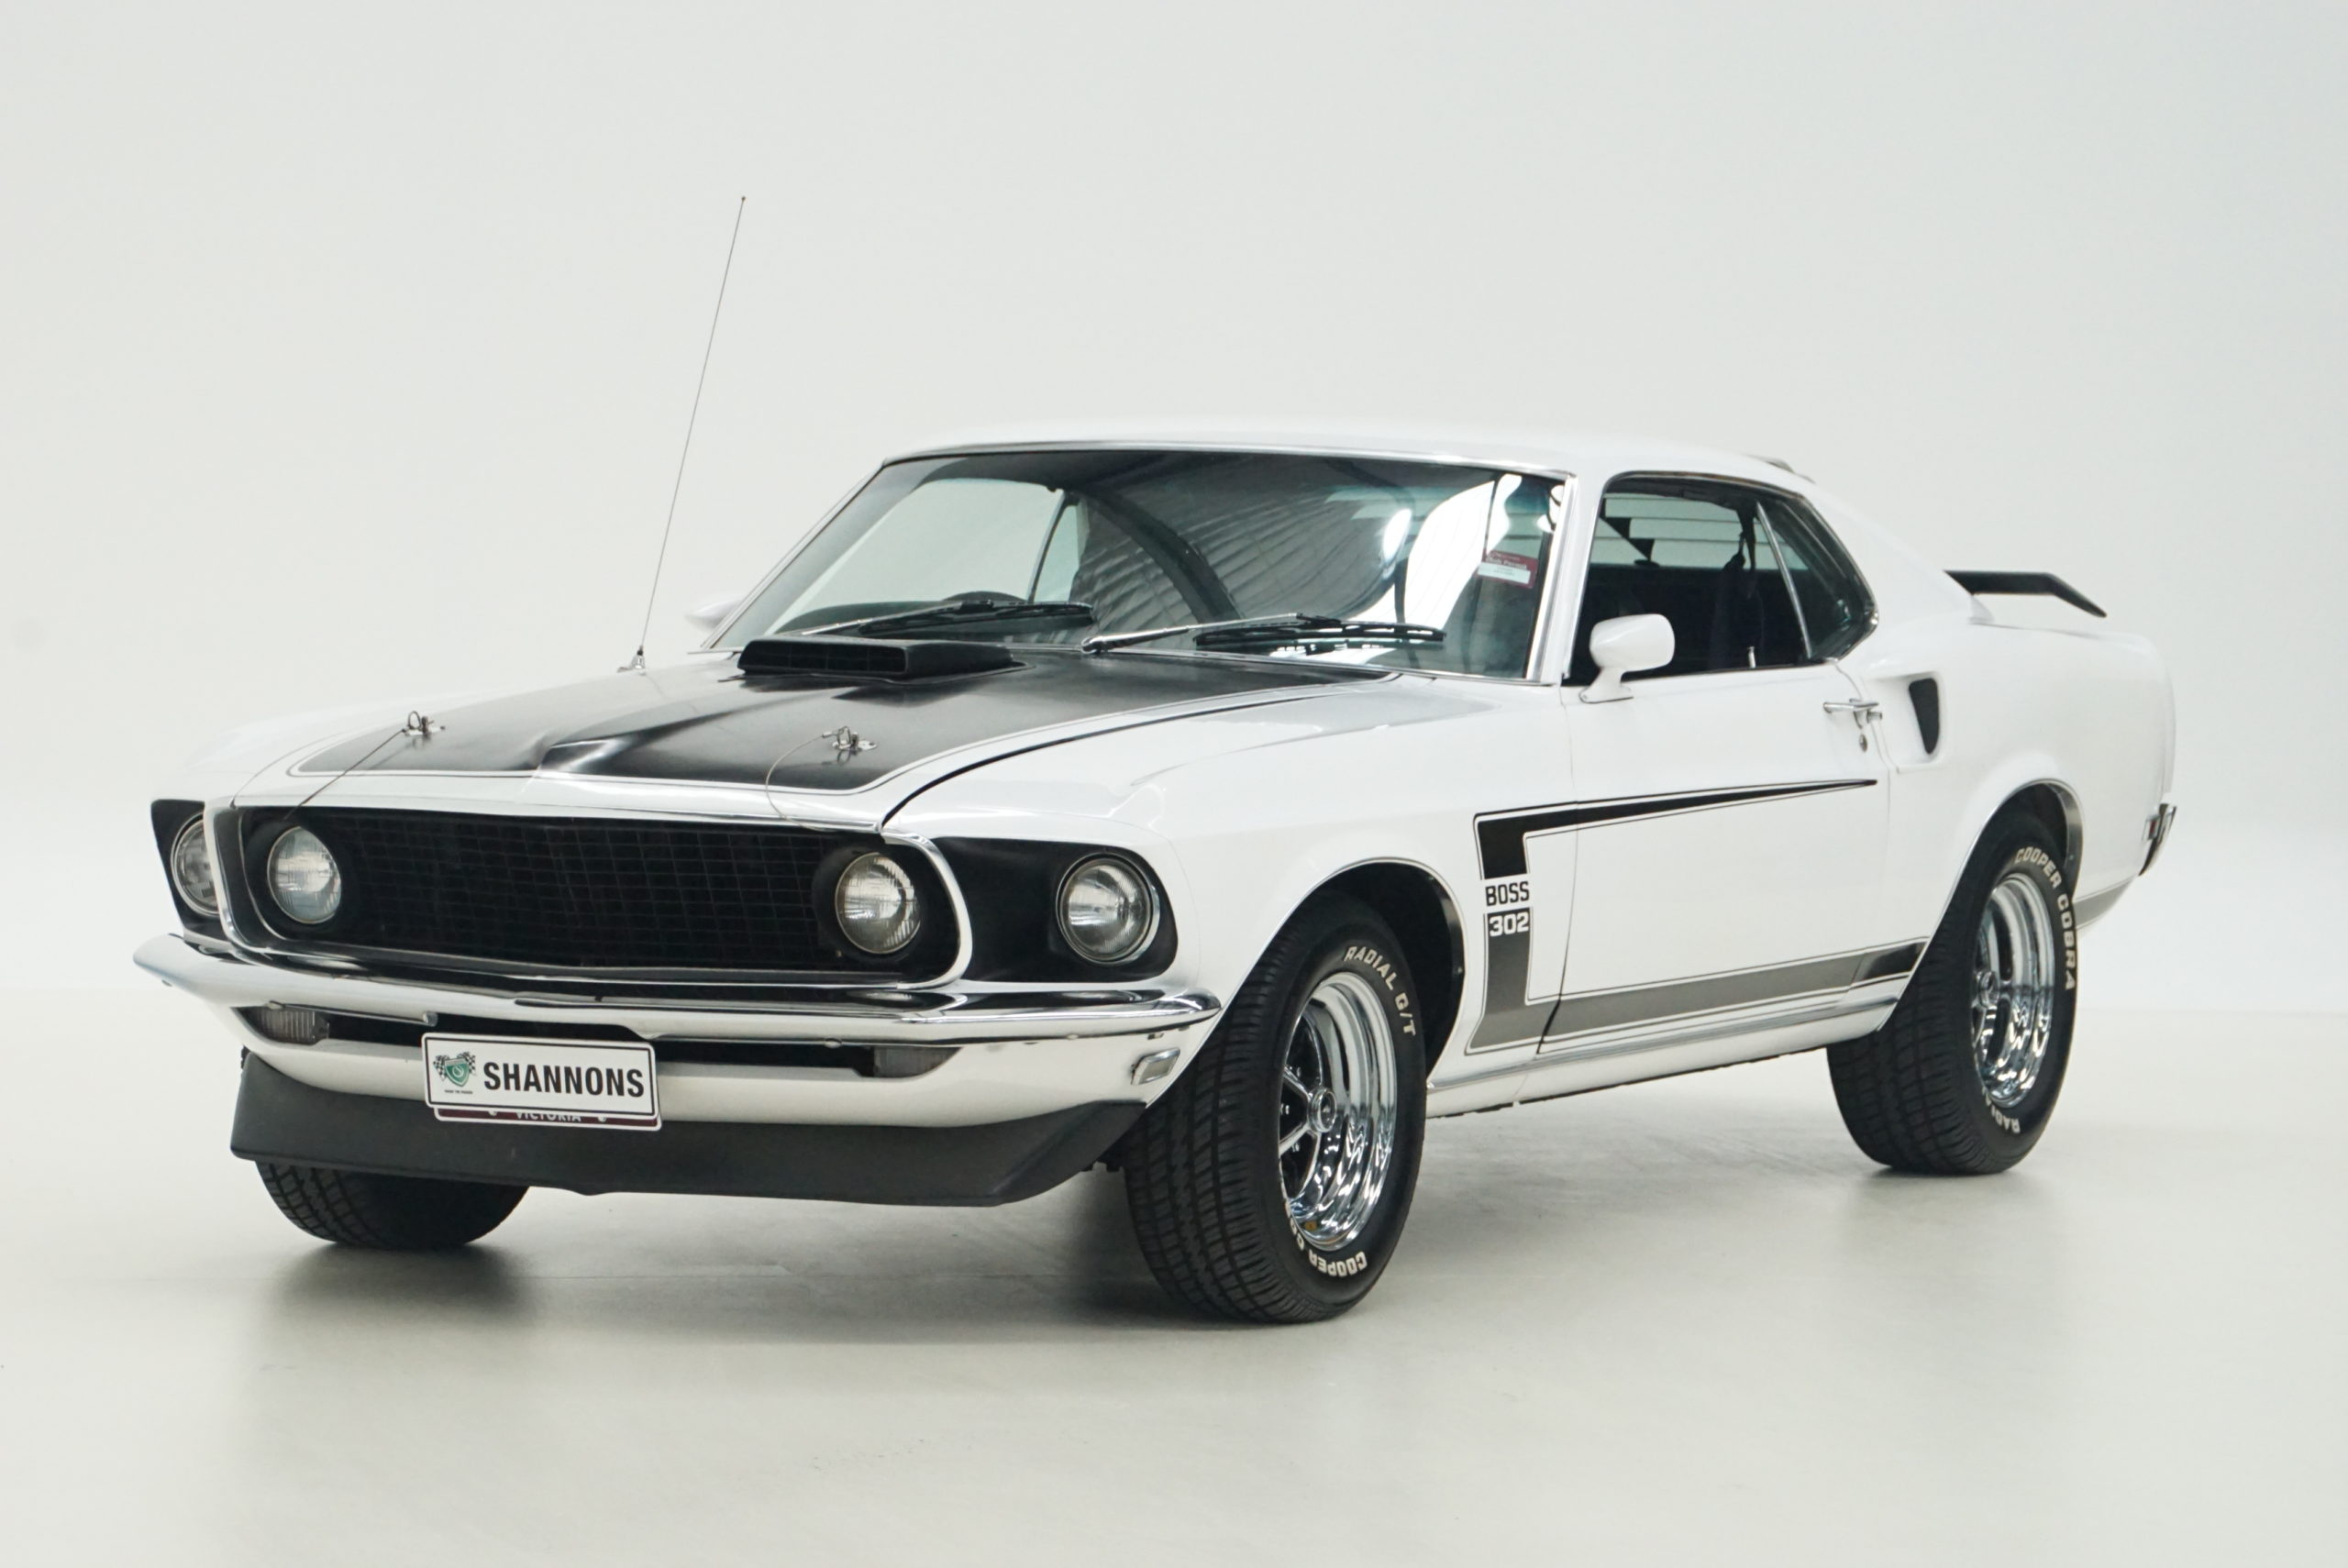 1969 Ford Mustang Boss 302 Tribute Fastback trois quarts avant gauche - Shannons Auctions avril 2021.